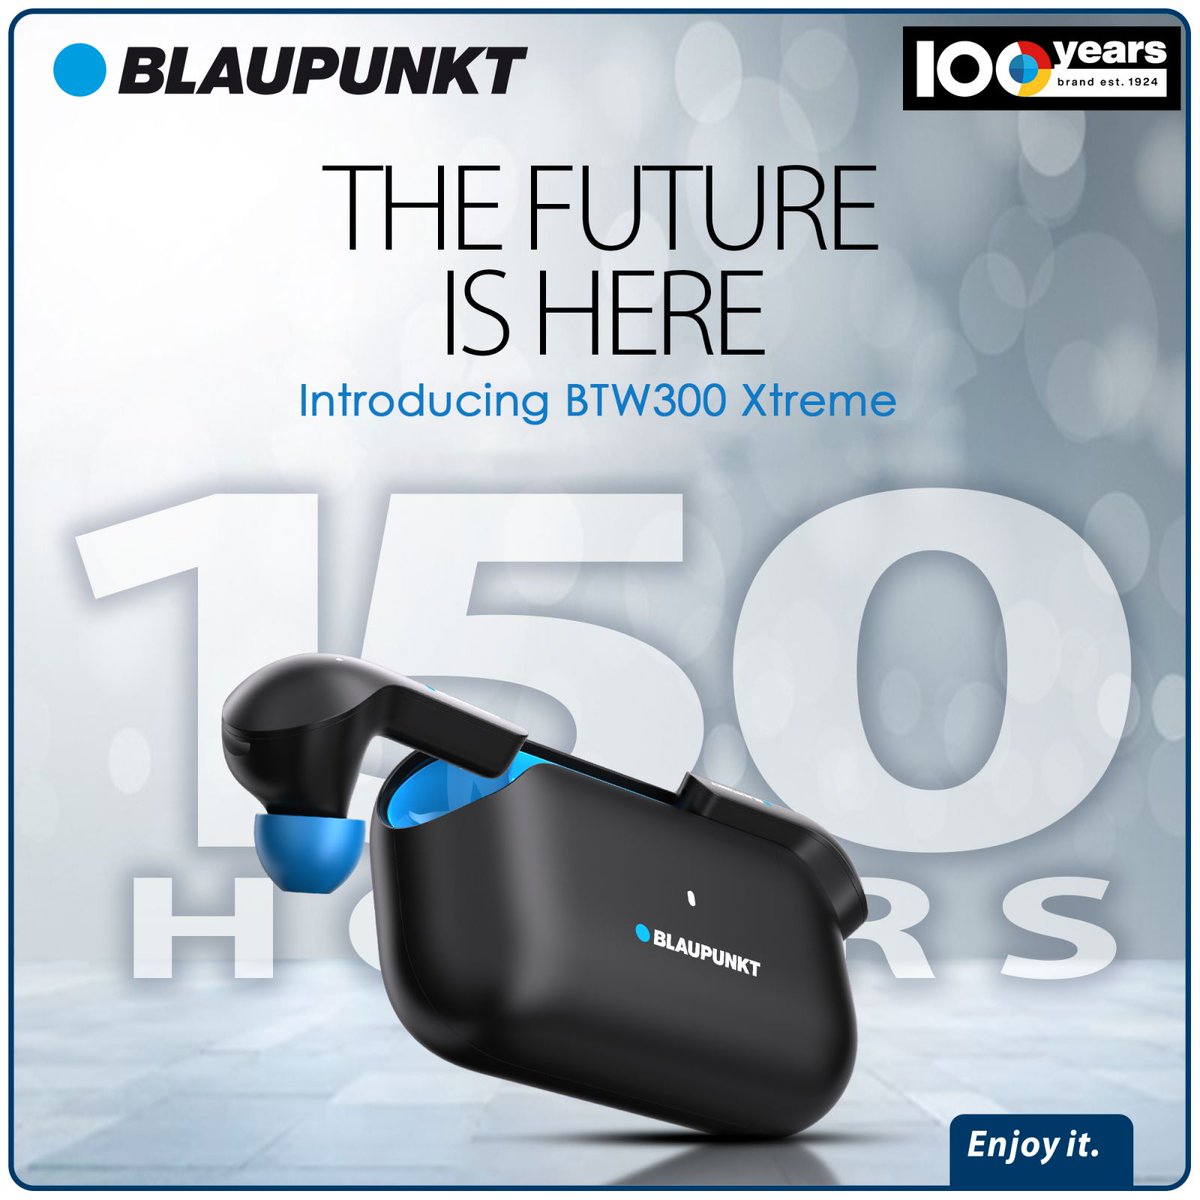 It’s here! The new BTW300 Xtreme has arrived. Now get ready for the next level of performance. 150 hours of Playtime, ENC, 8X Charging… The list of features is long. And Xtreme! Check it out right now. Buying 🔗 shorturl.at/aSW59 #TWS #launchingdaytoday #launchednow…